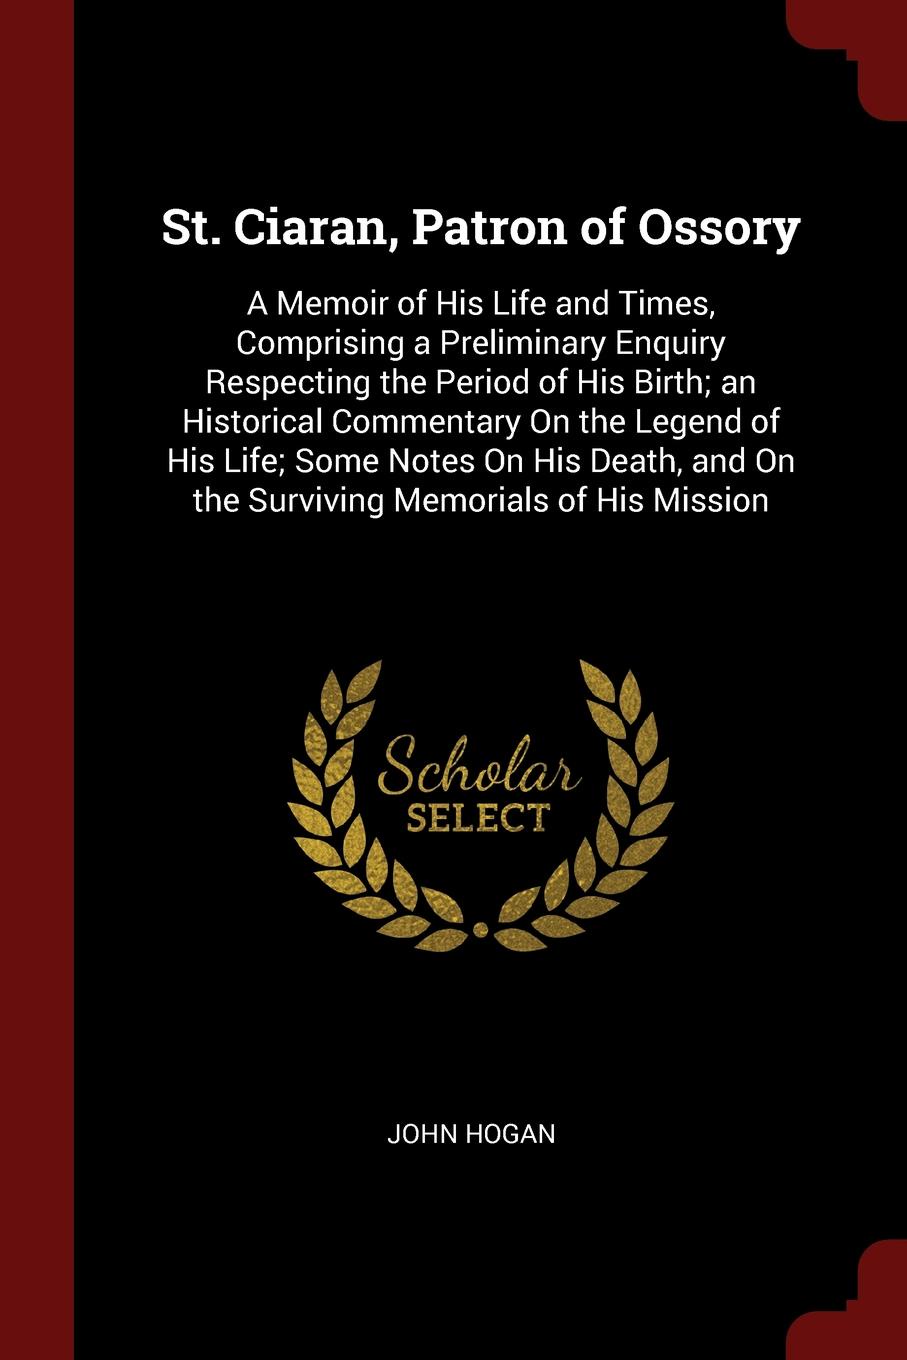 St. Ciaran, Patron of Ossory. A Memoir of His Life and Times, Comprising a Preliminary Enquiry Respecting the Period of His Birth; an Historical Commentary On the Legend of His Life; Some Notes On His Death, and On the Surviving Memorials of His M...